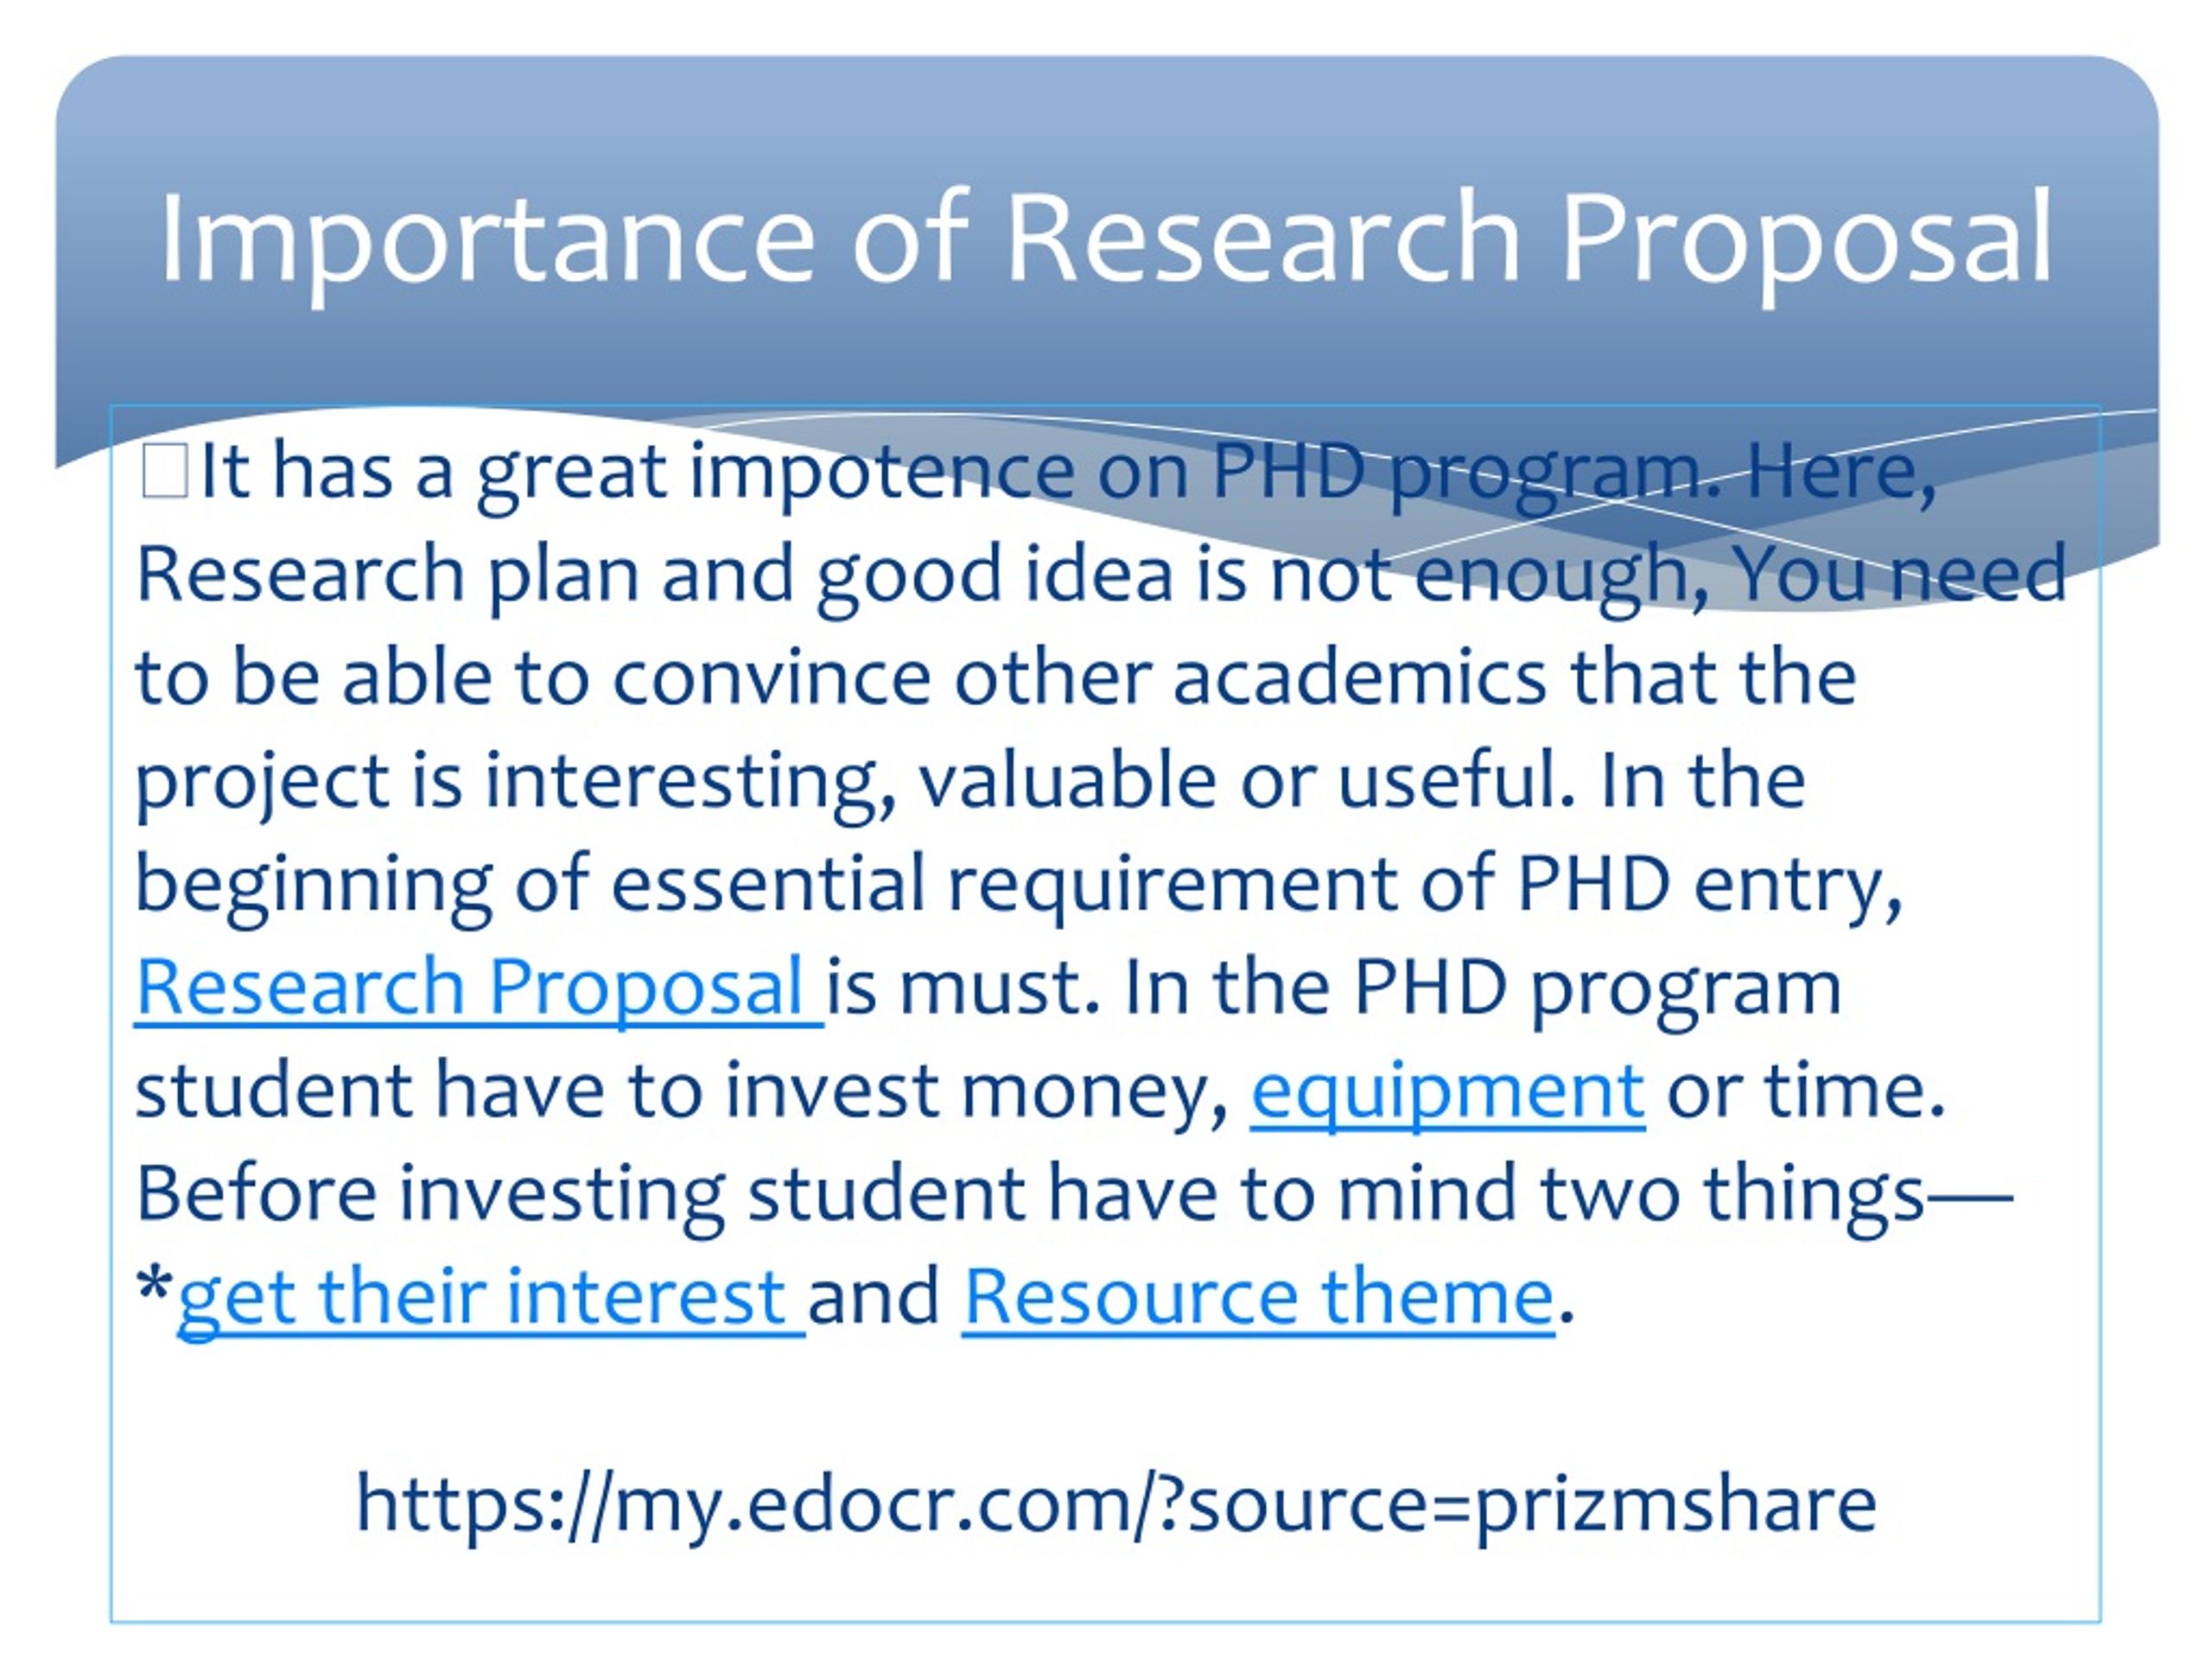 what is the importance of research proposal